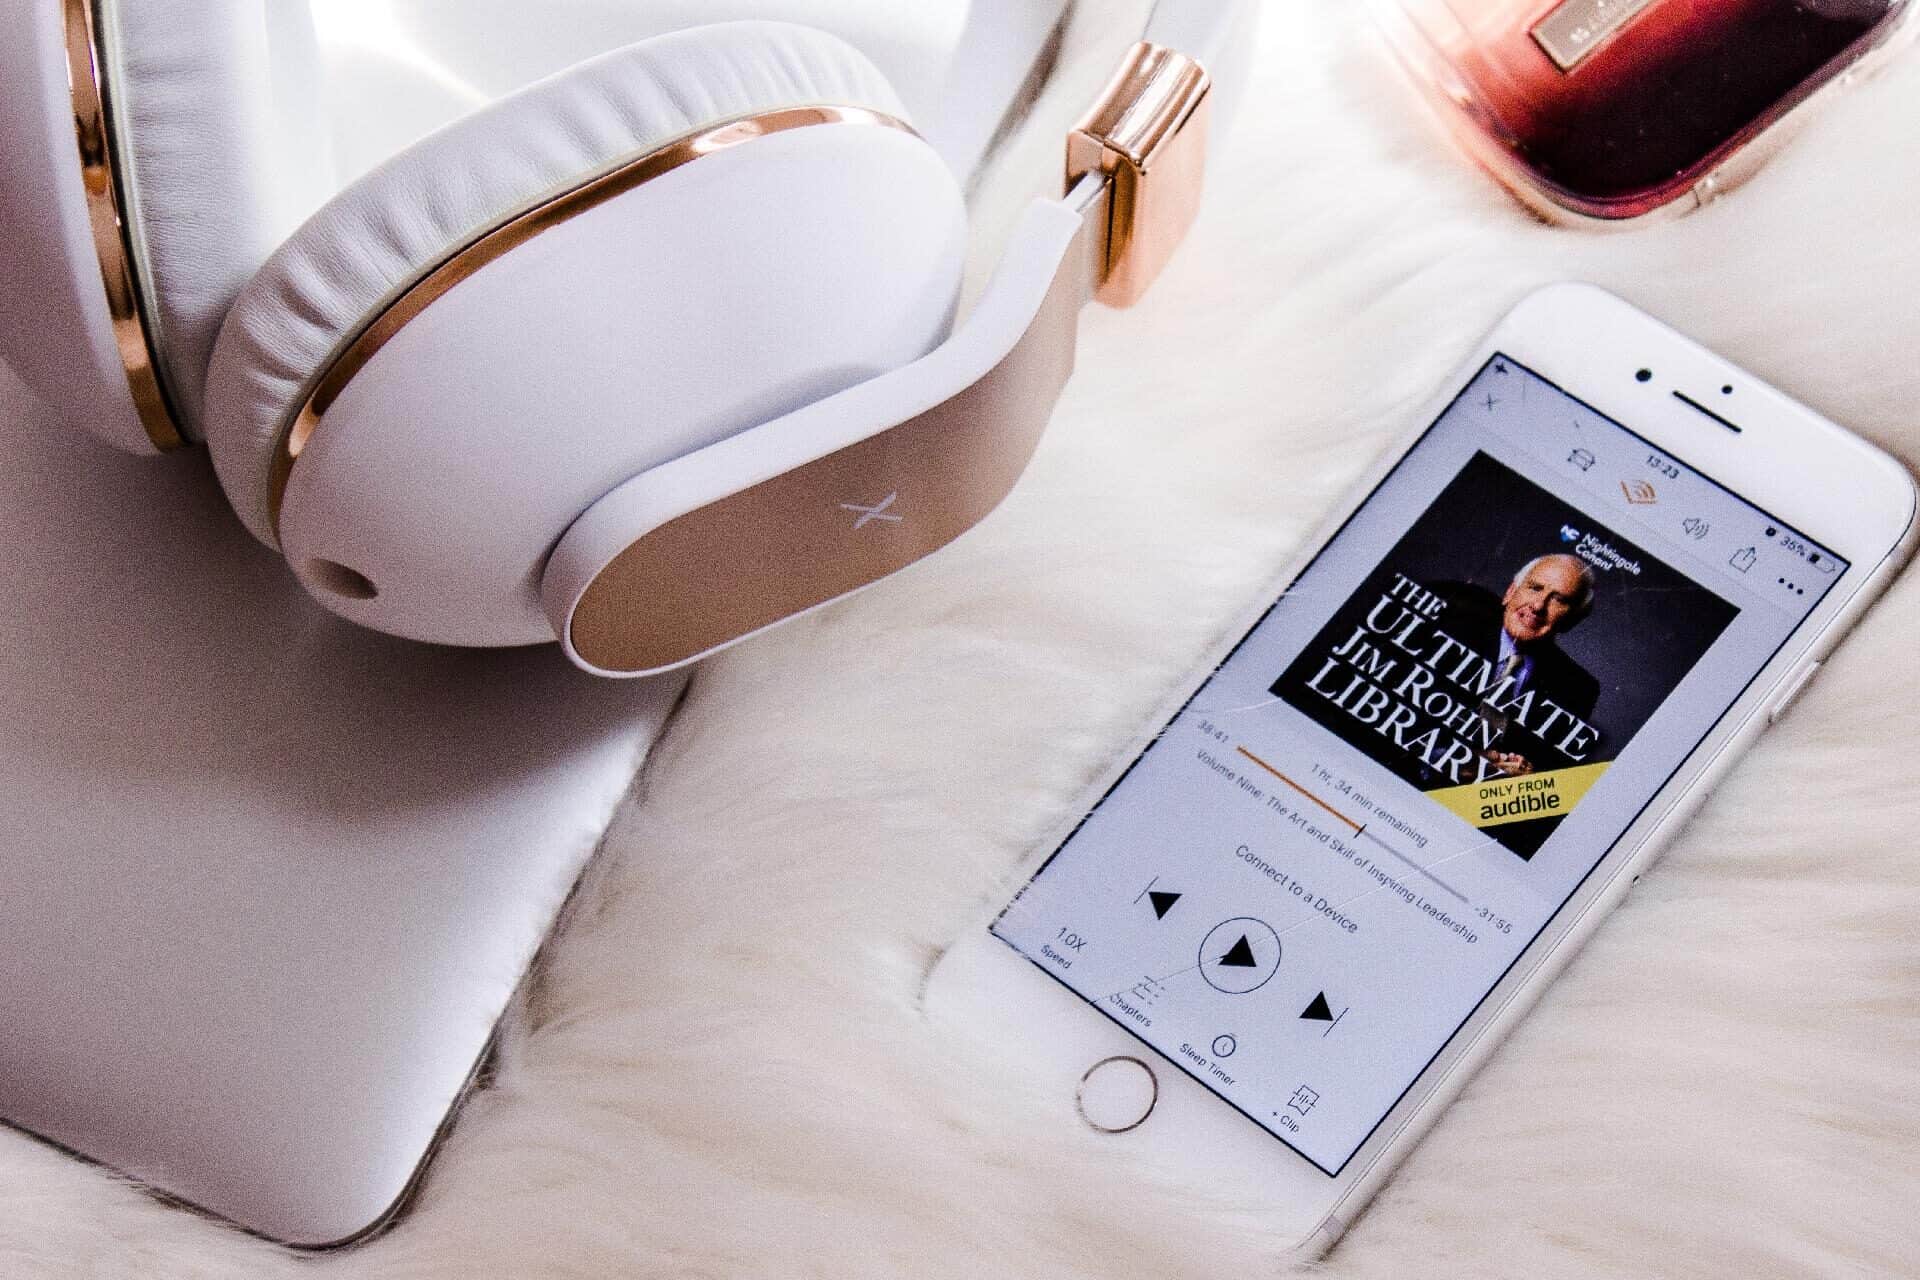 how-to-buy-audible-books-without-a-membership